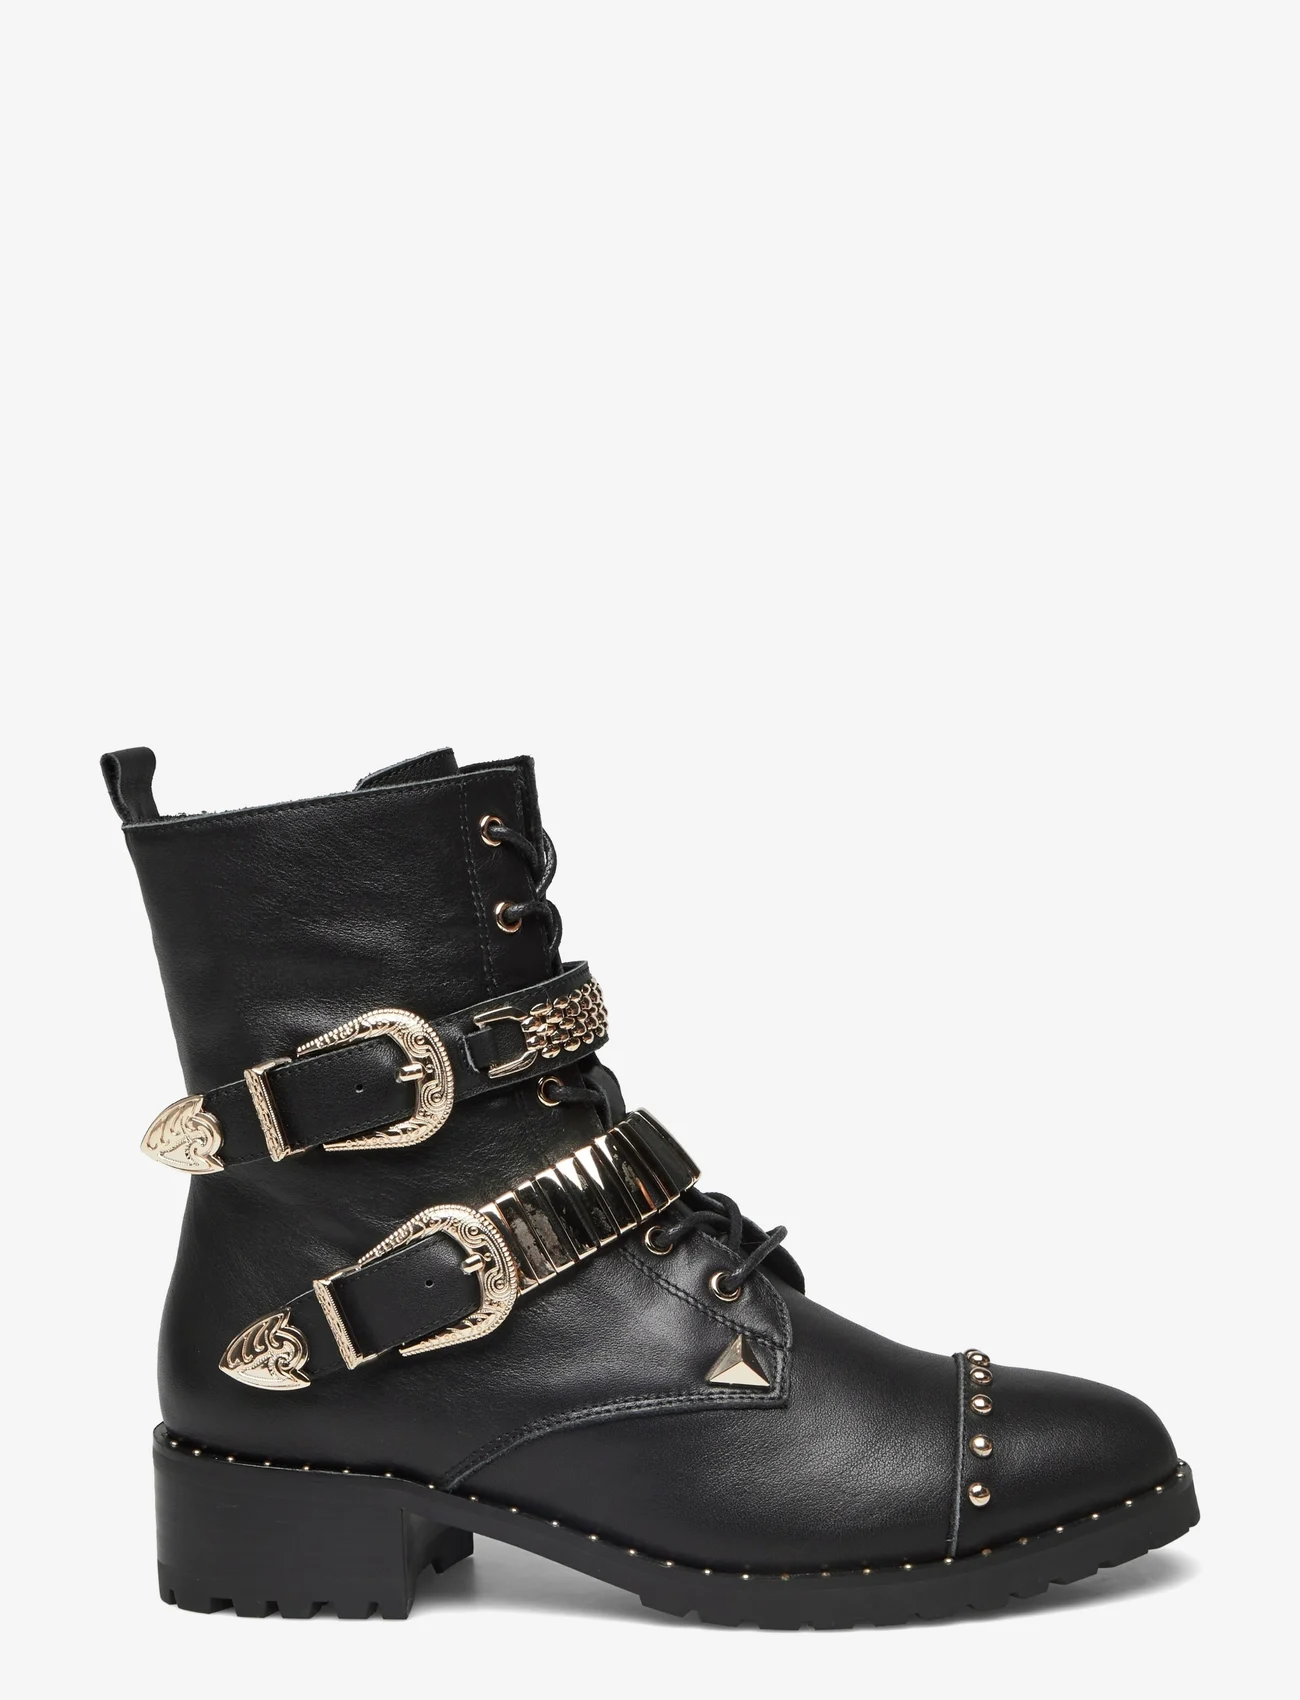 Sofie Schnoor - Boot - laced boots - black - 1